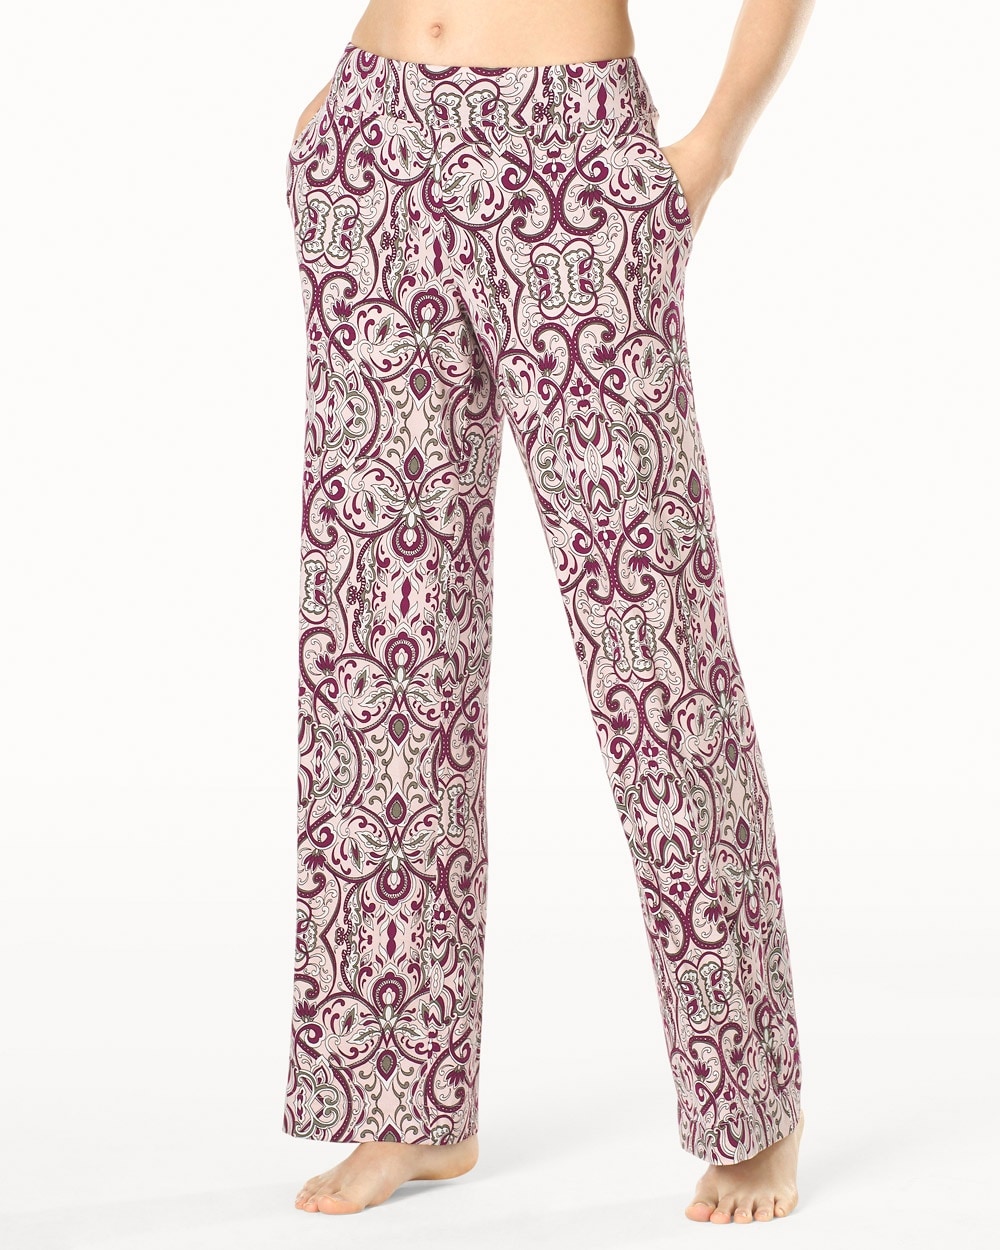 Embraceable Cool Nights Tall Inseam Pajama Pants Femme Scroll Pink Romance